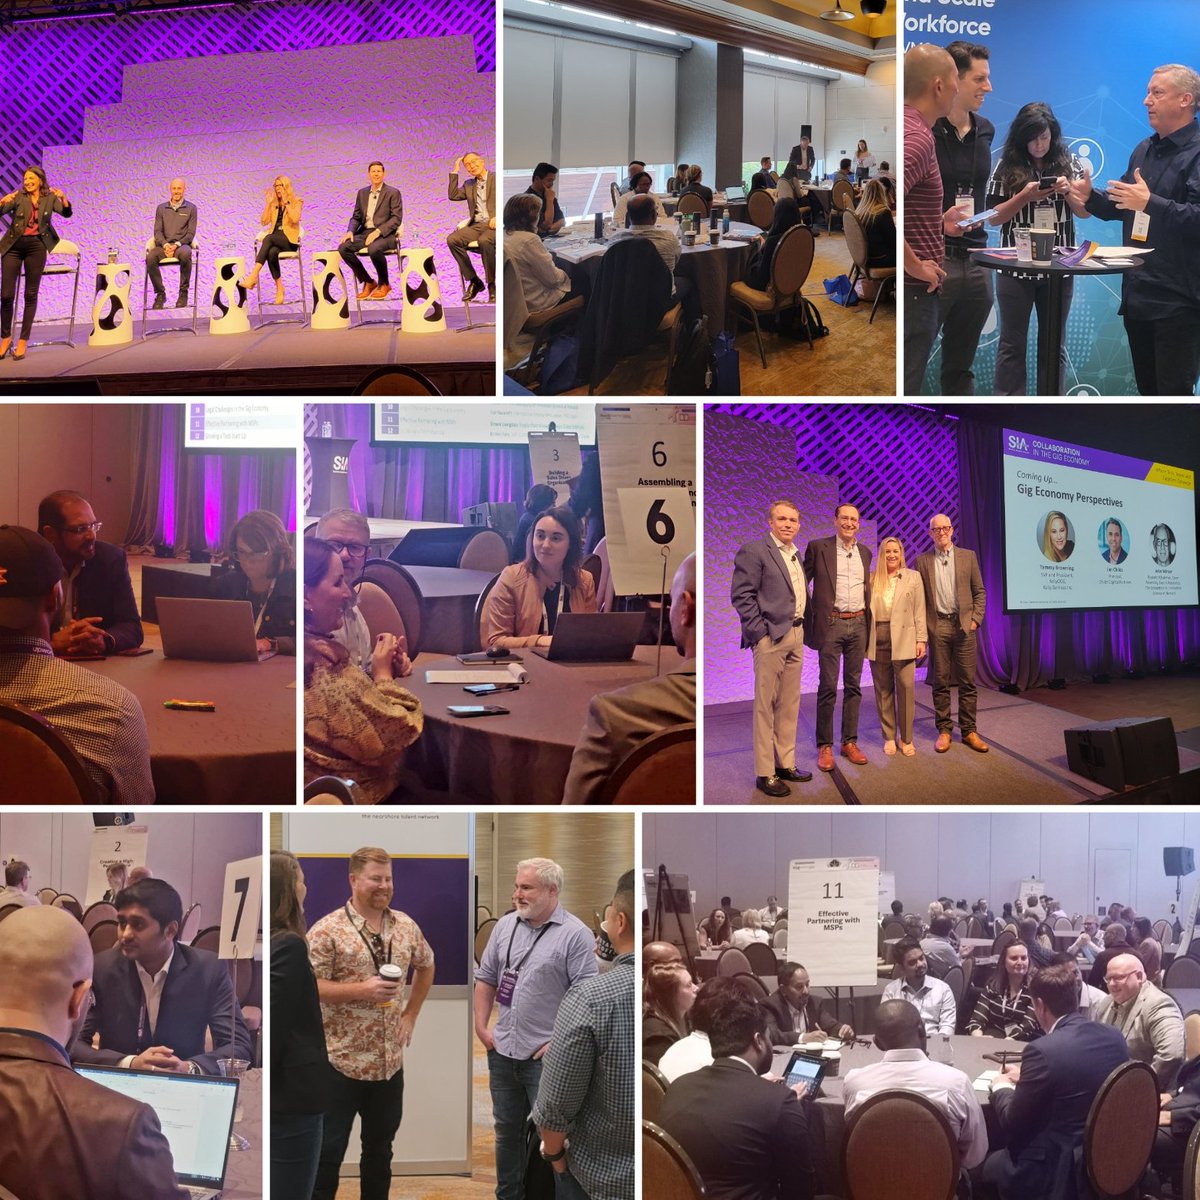 That's a wrap! #SIAGigE has officially come to a close, and so ends our time in #Dallas. Join us next year when we return to the Omni Dallas Hotel for our 2024 conference. Learn more by visiting staffingindustry.com. #gigeconomy #technology #staffing #contingentworkforce